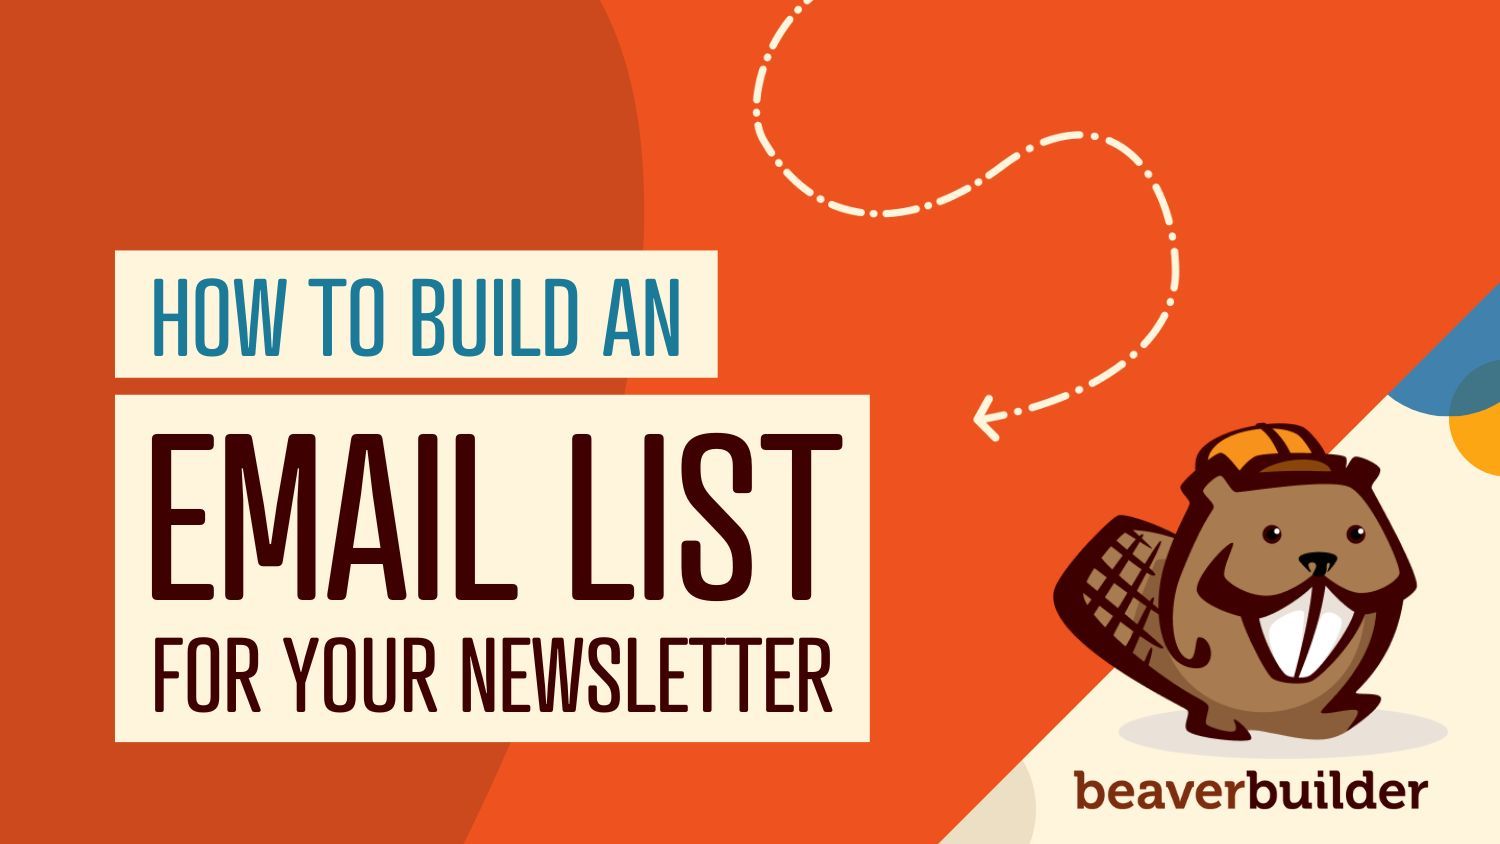 how-to-build-an-email-list-for-your-newsletter-beaver-builder-blog